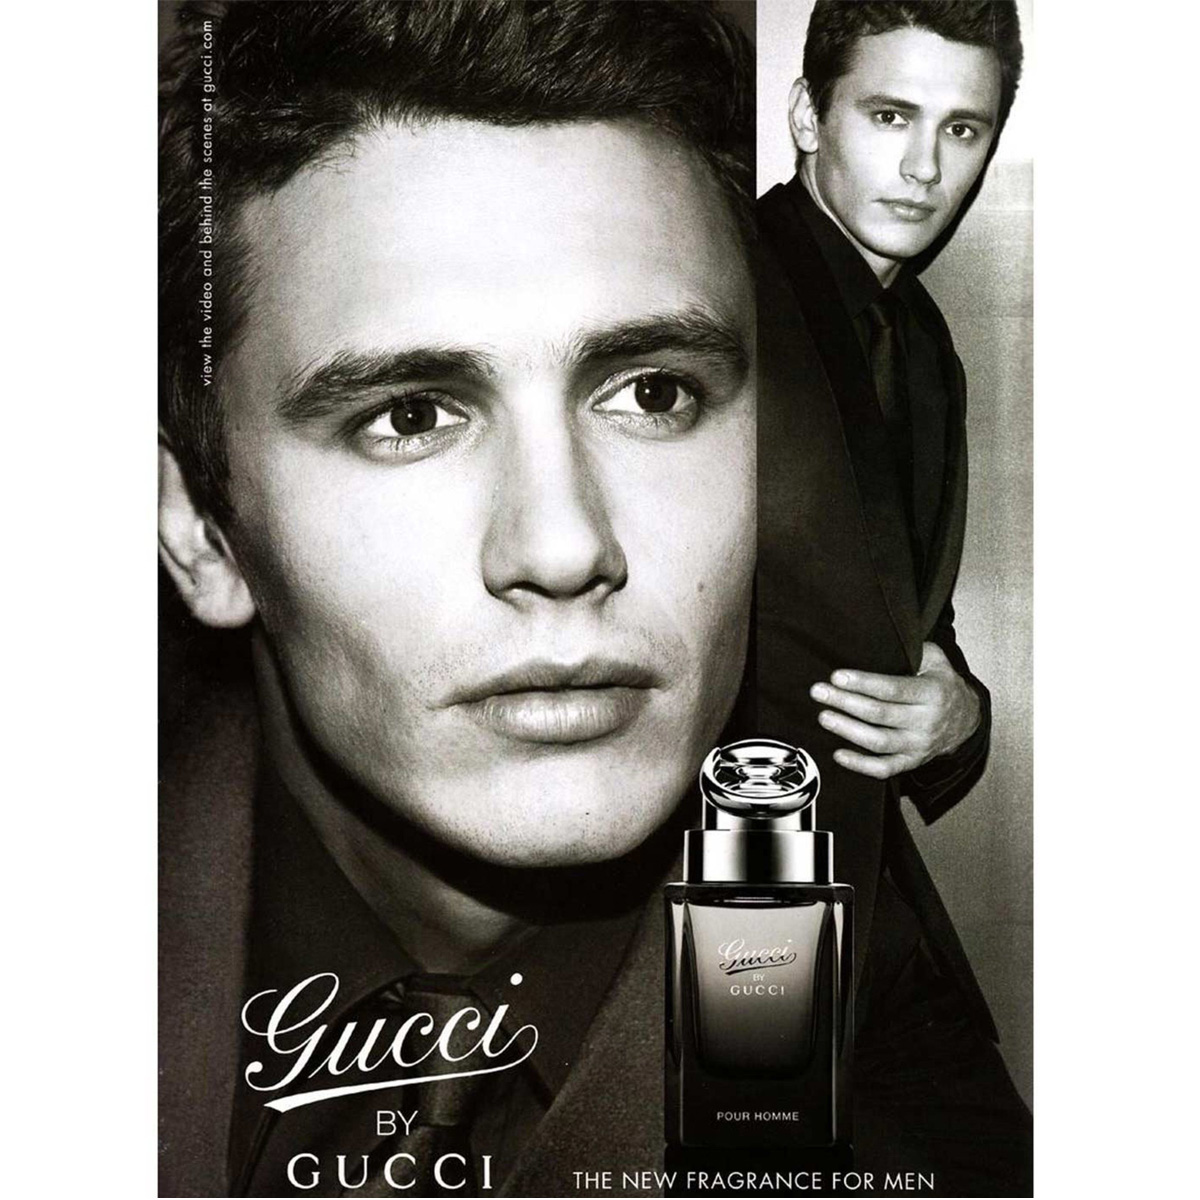 Gucci-by-Gucci-Pour-Homme-Poster.jpg